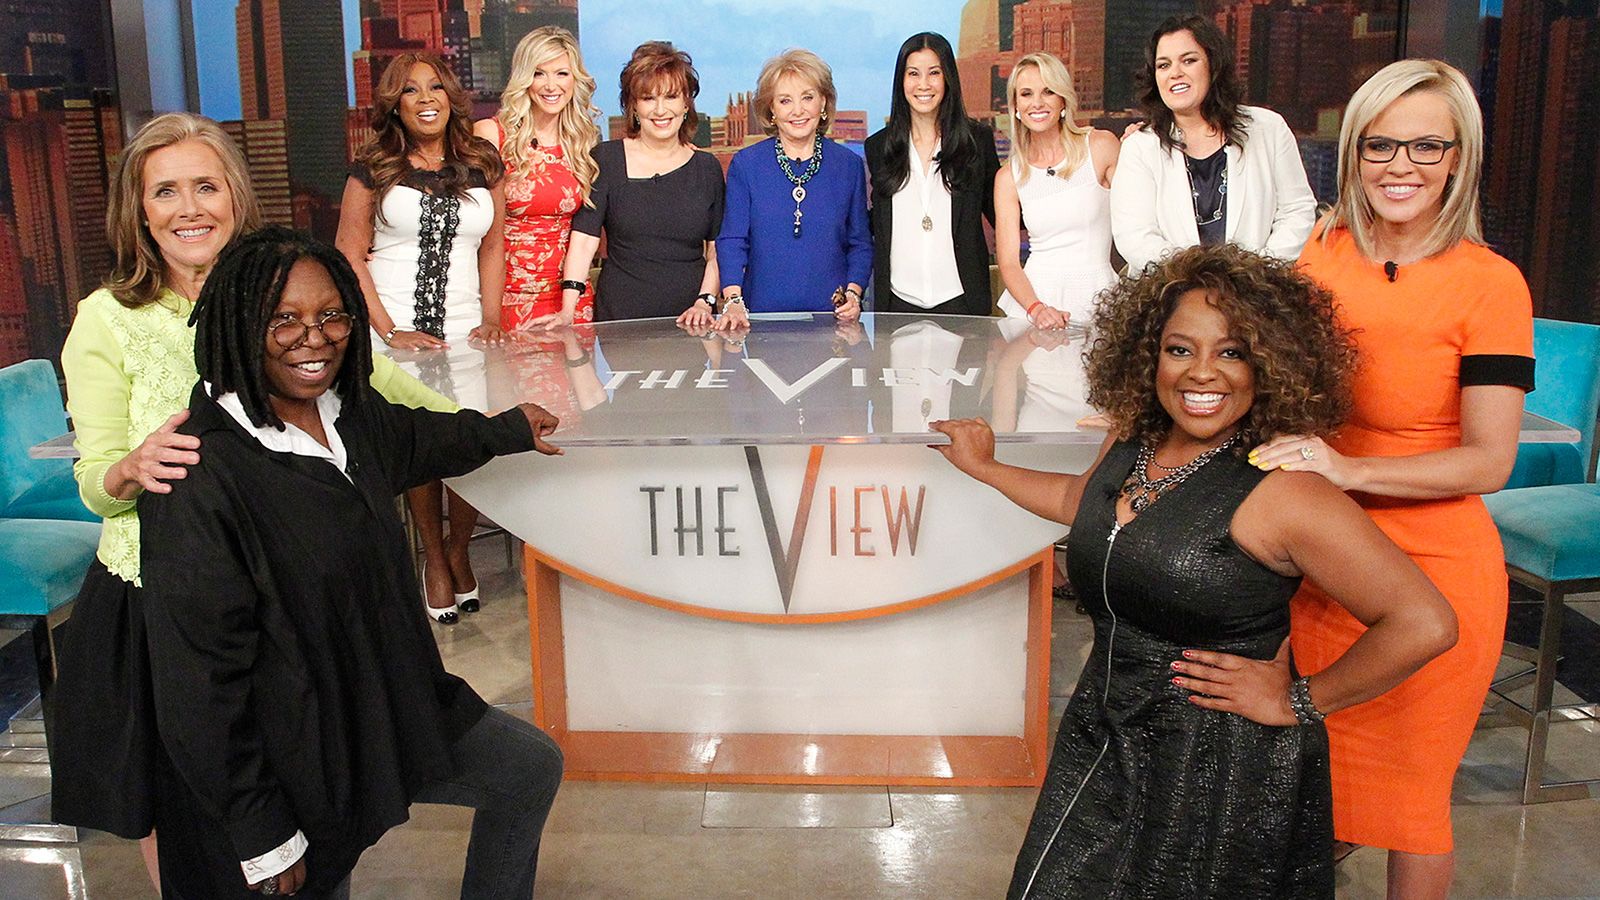 The view pays tribute to barbara walters business